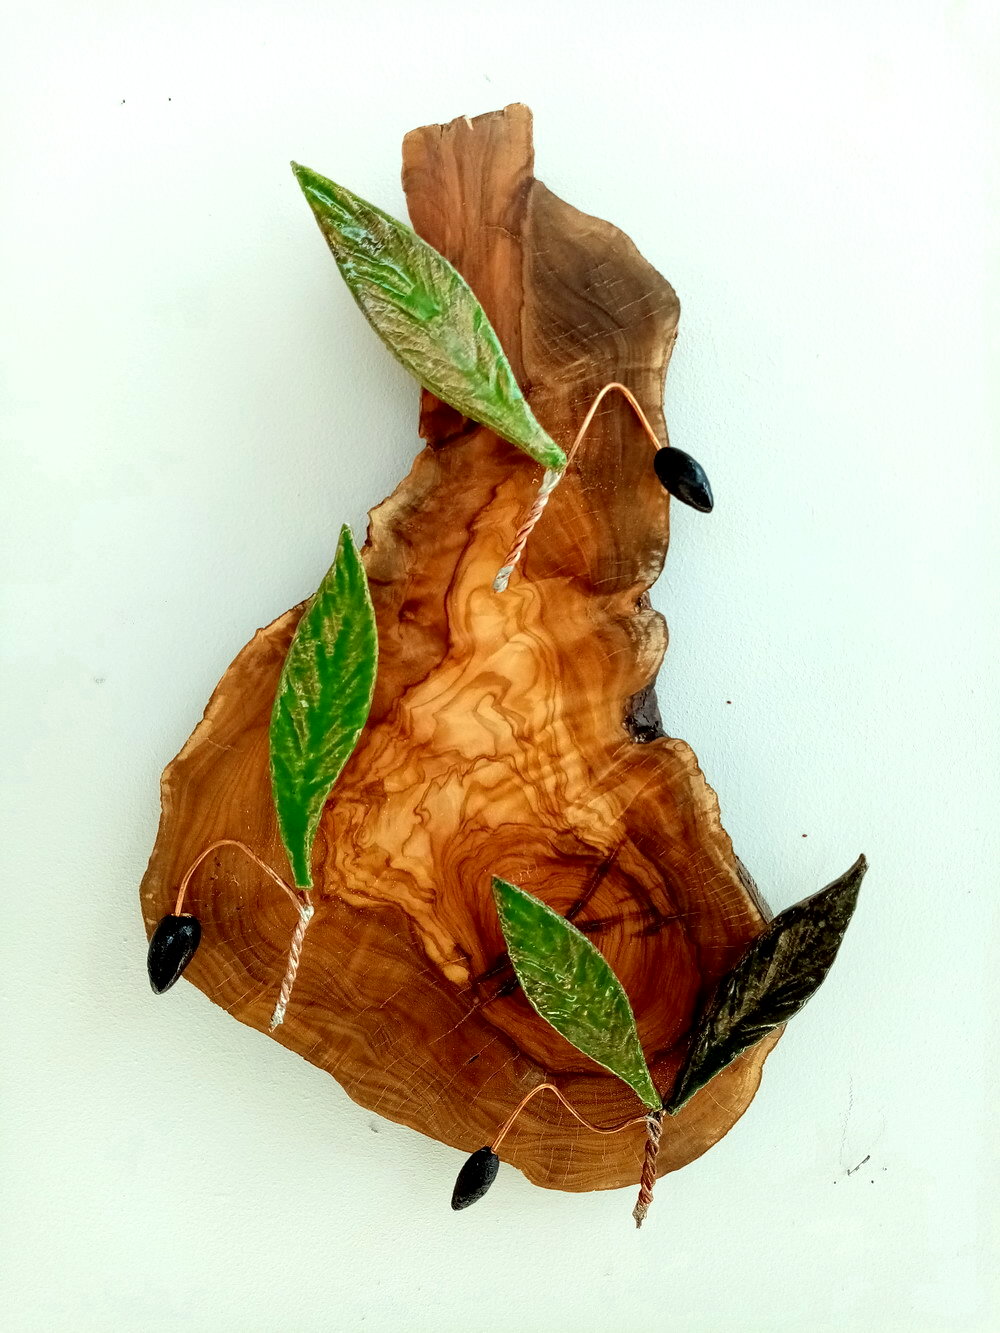 Wall decoration made of olive wood and ceramics